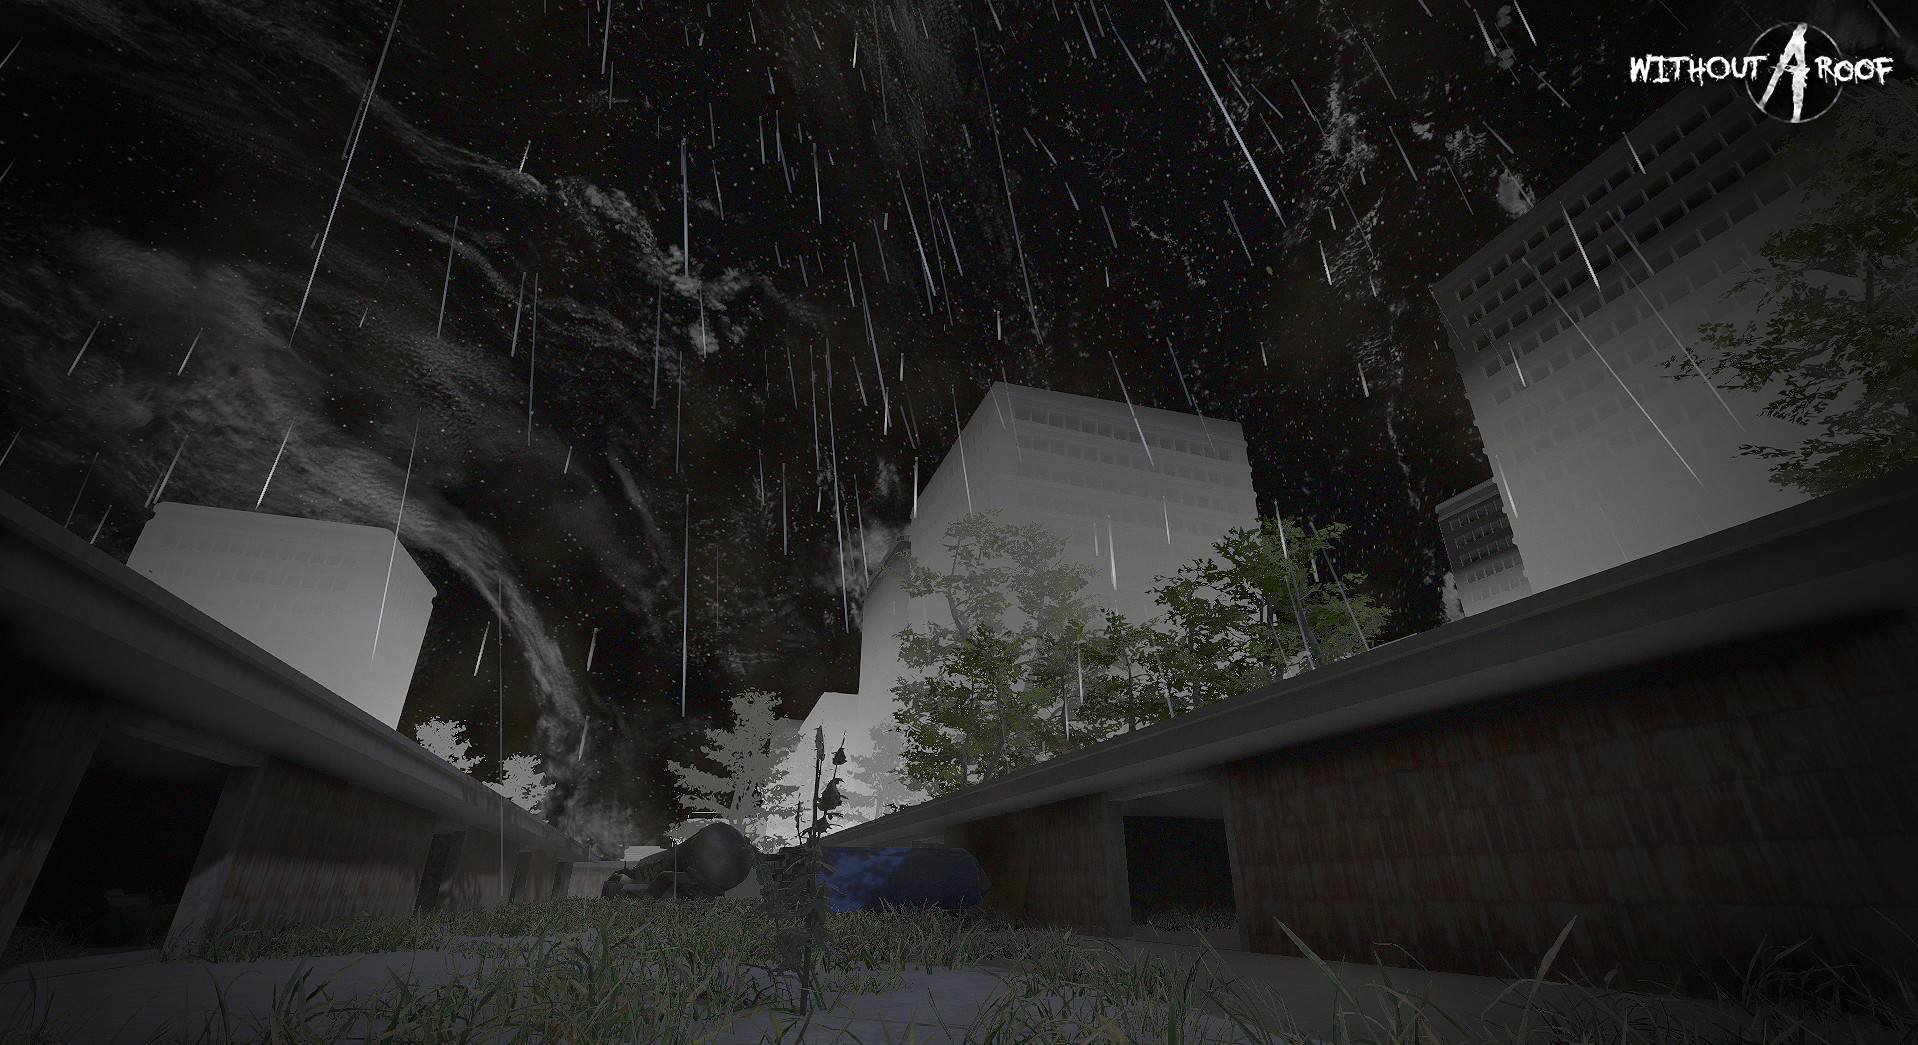 Without A Roof (W.A.R.) screenshot